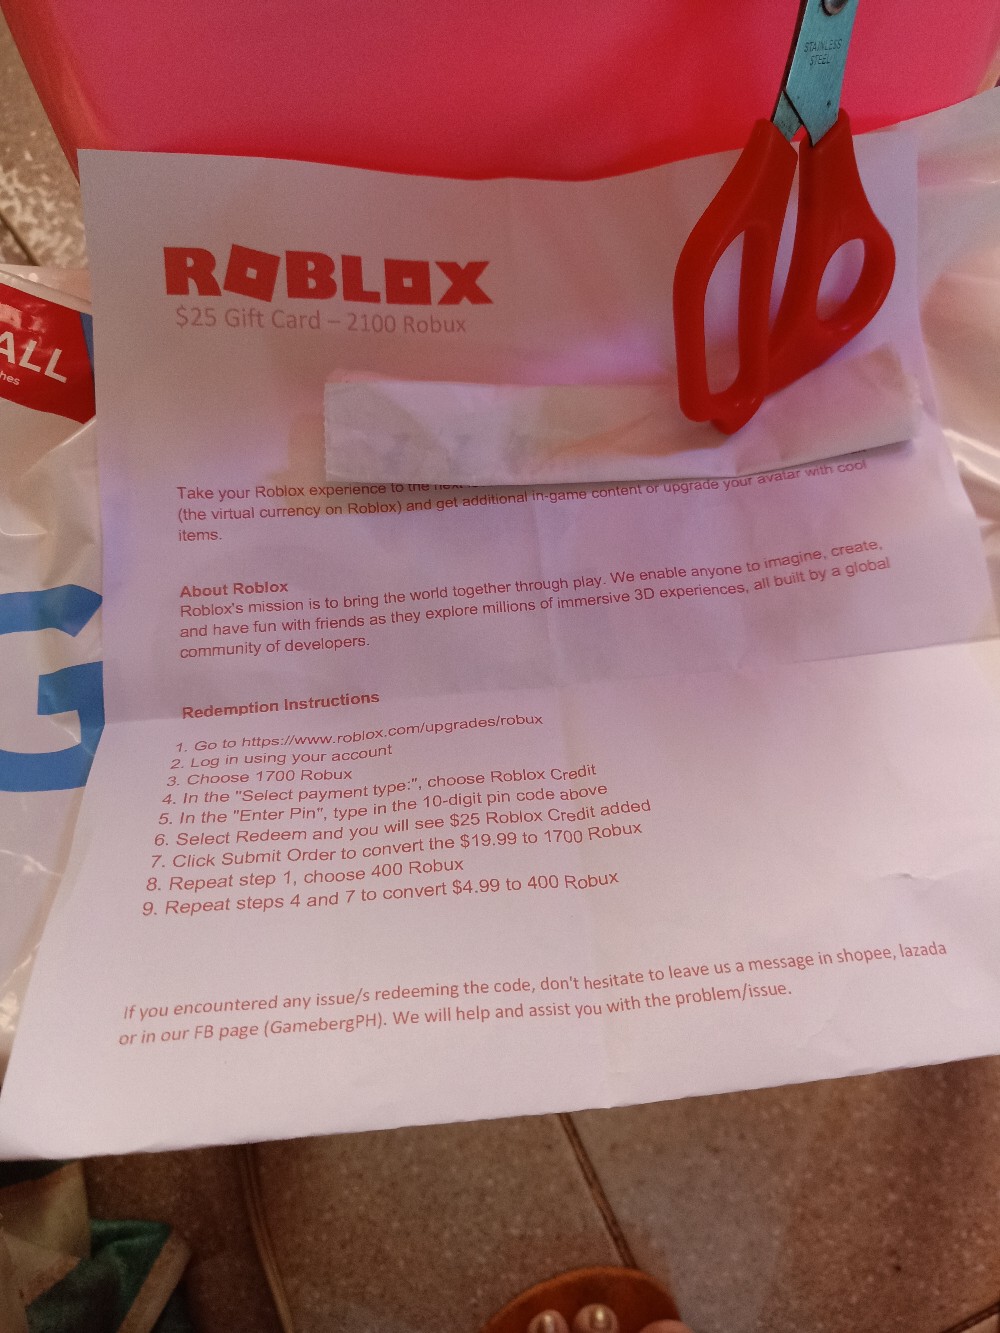 Robux Roblox 25 Gift Card 2100 Points Shopee Philippines - roblox gift card philippines lazada